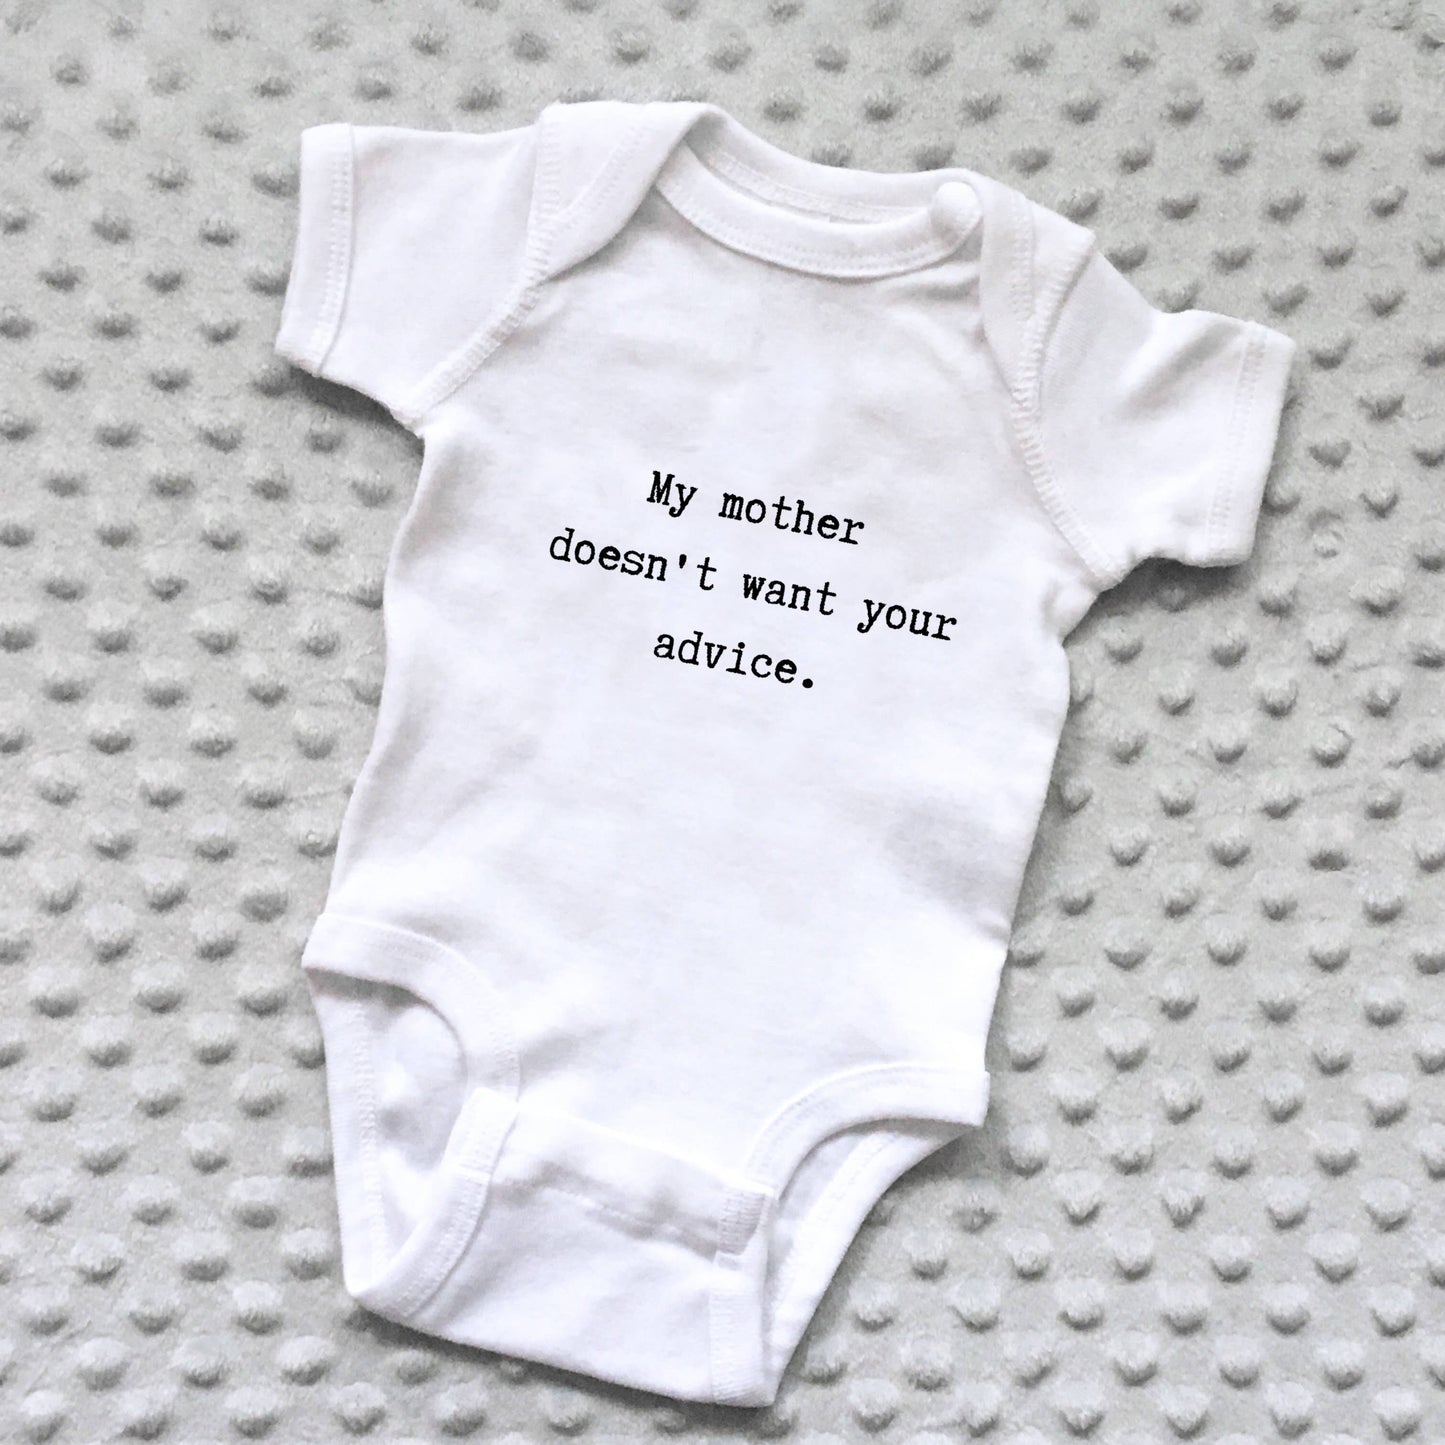 My mother doesn't want your advice - Baby Onesie by Things UnCommon